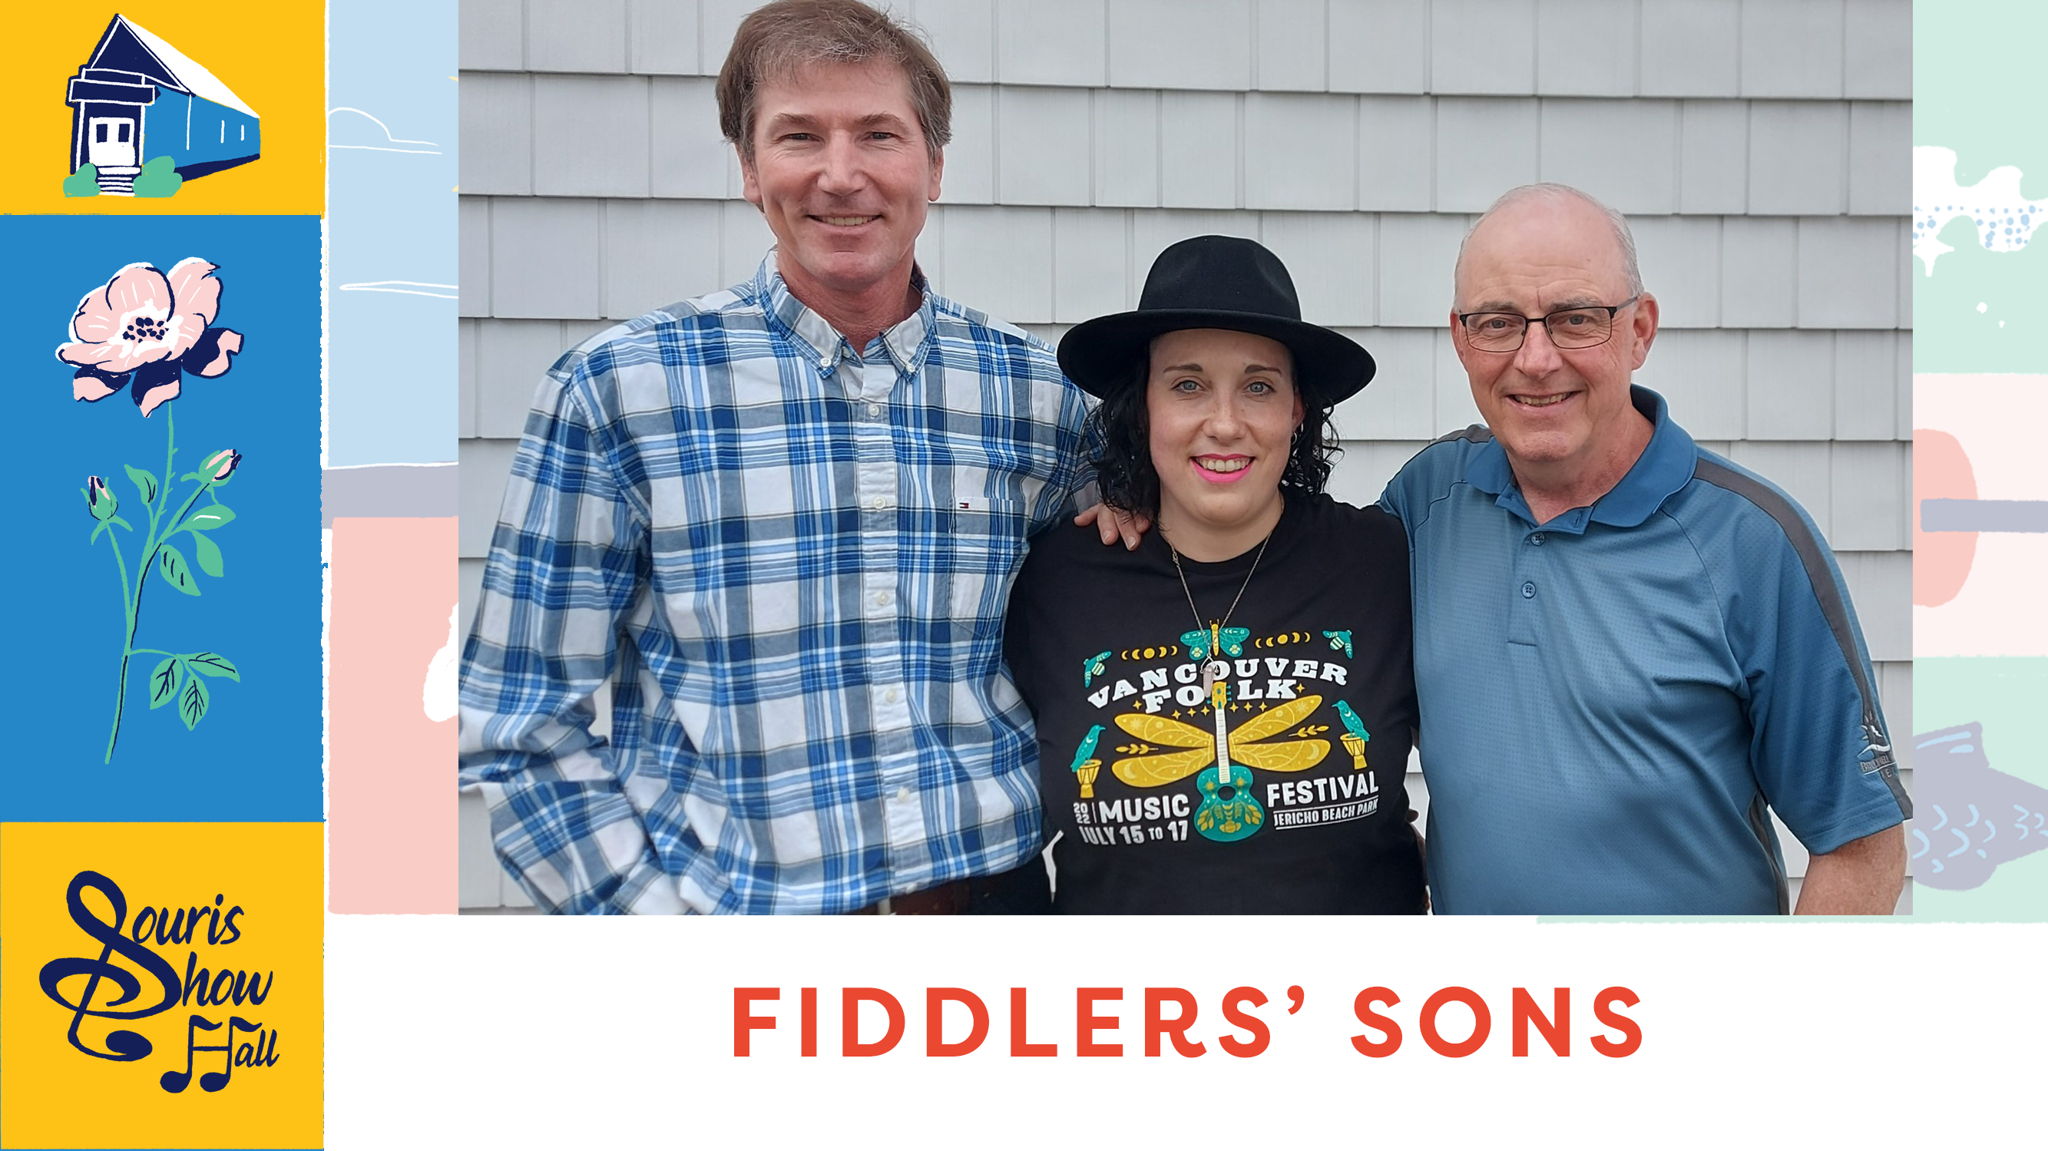 Fiddlers' Sons at the Souris Show Hall